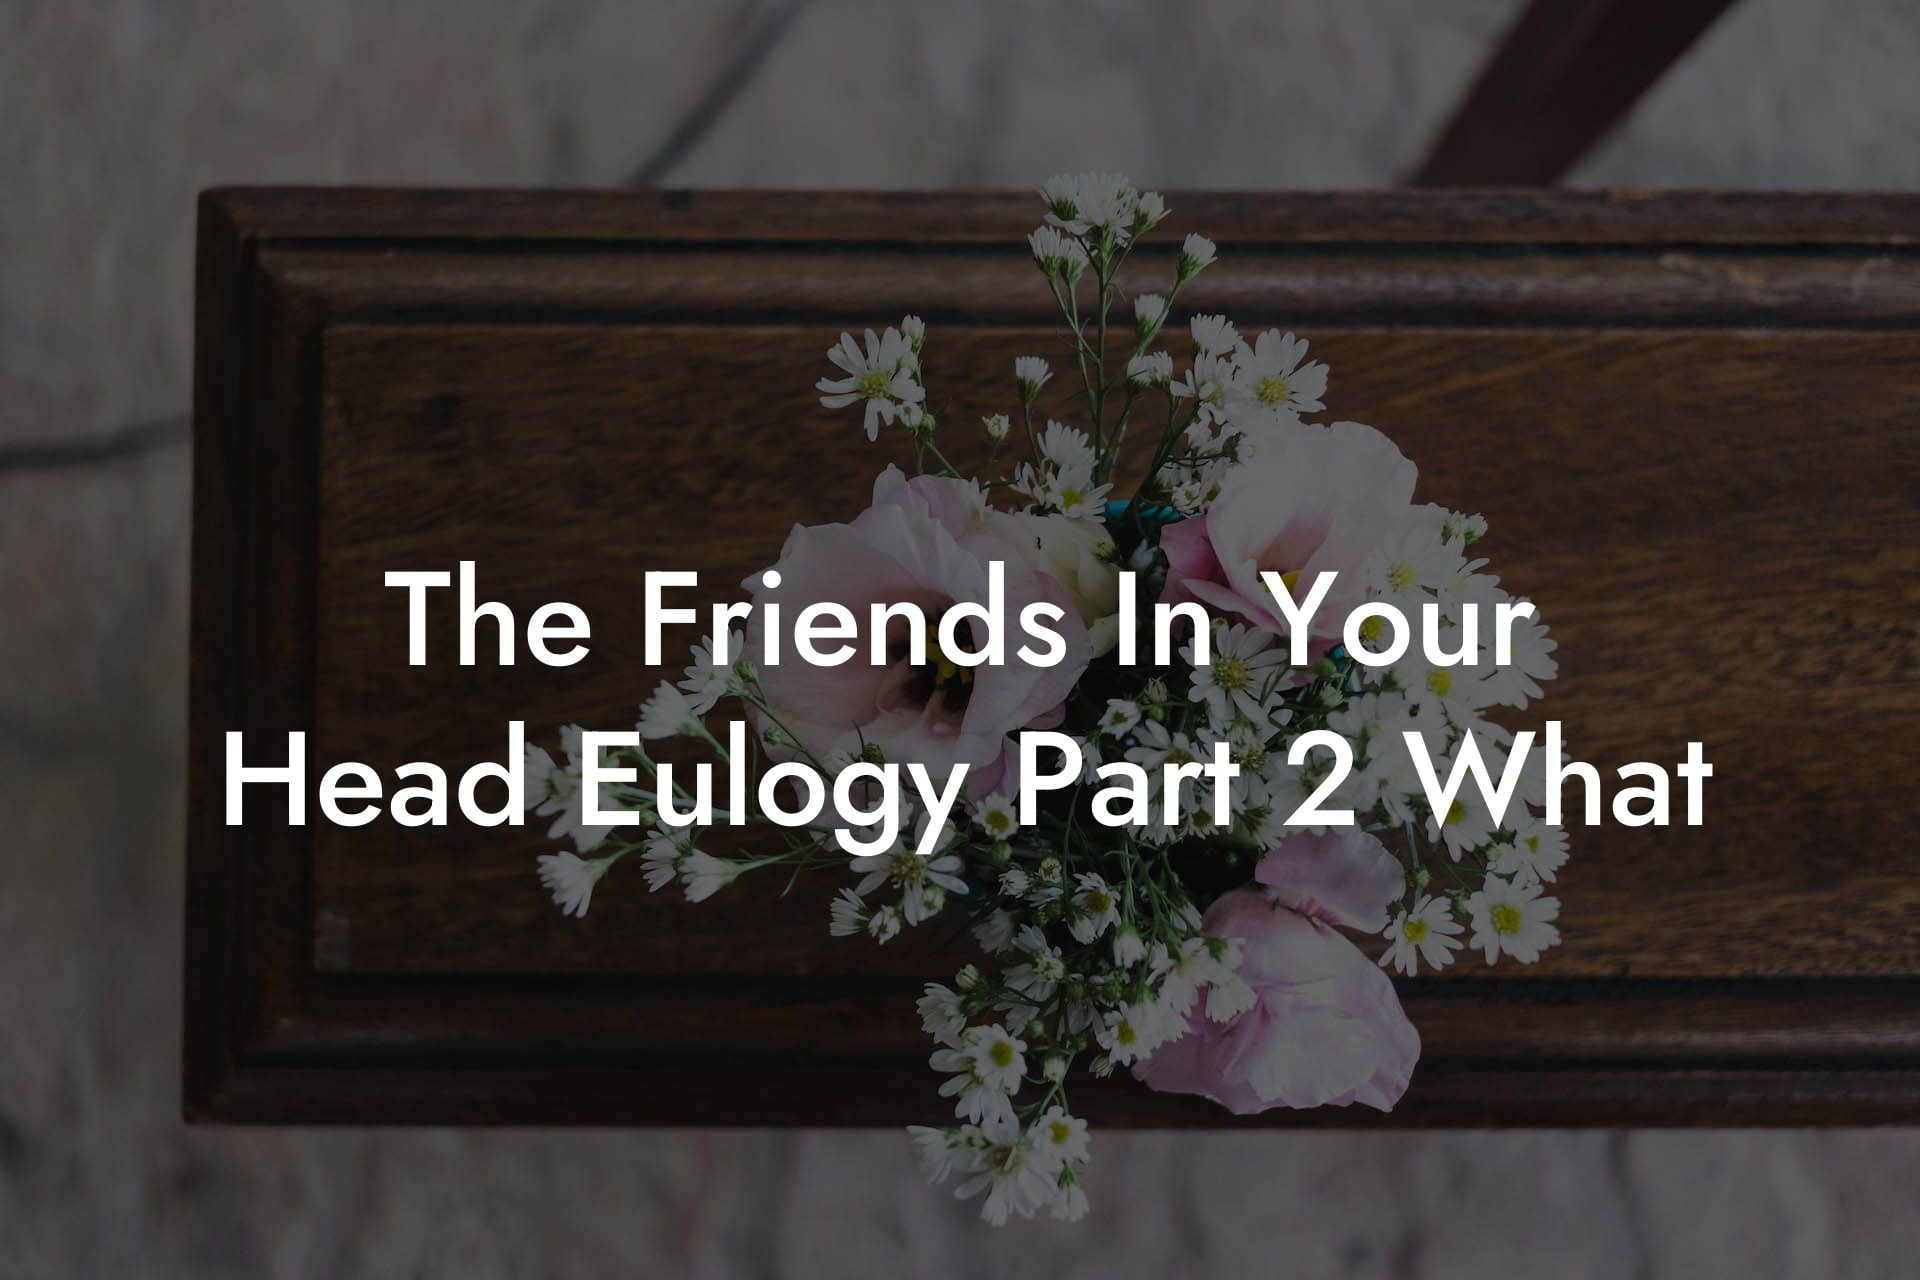 The Friends In Your Head Eulogy Part 2 What